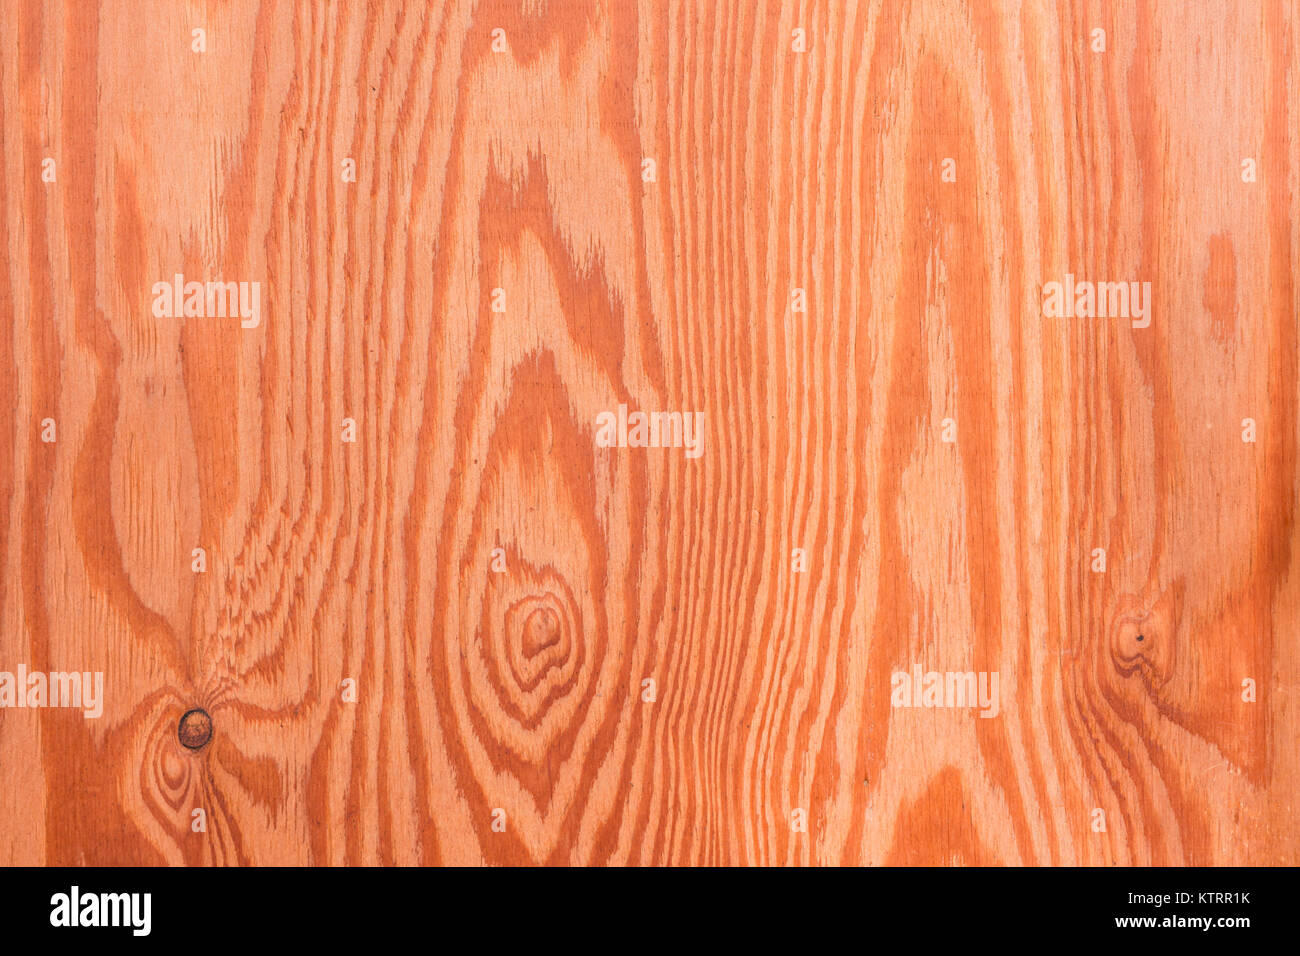 Japanese Pine Wood Texture for background. Stock Photo